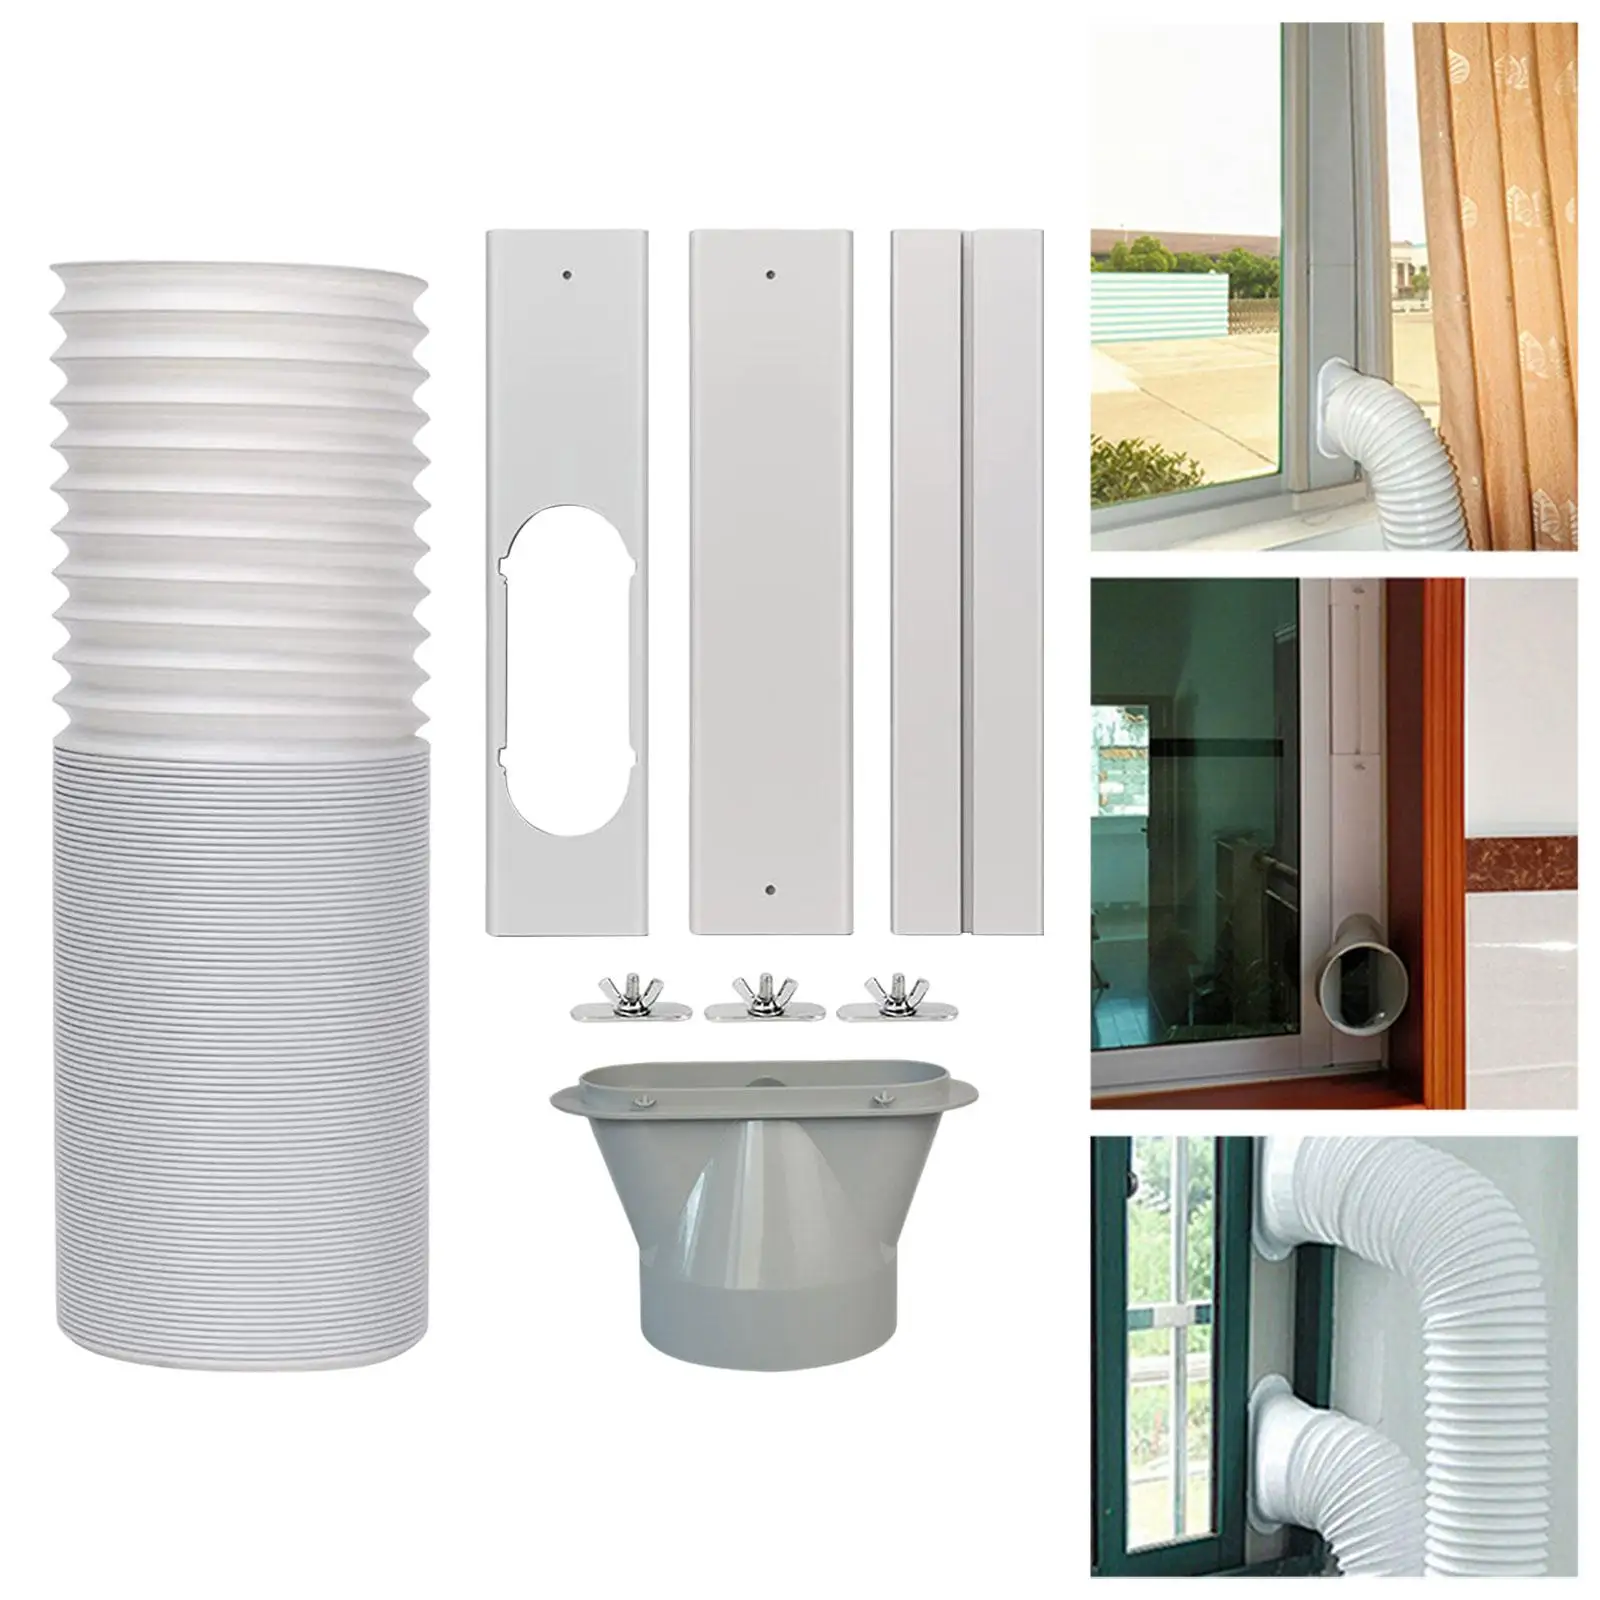 Air Conditioner Window Seal kit, 5Pcs Window Plate Kit, Flexible Exhaust Hose, Easy to Install, Air Conditioner Pipe Set